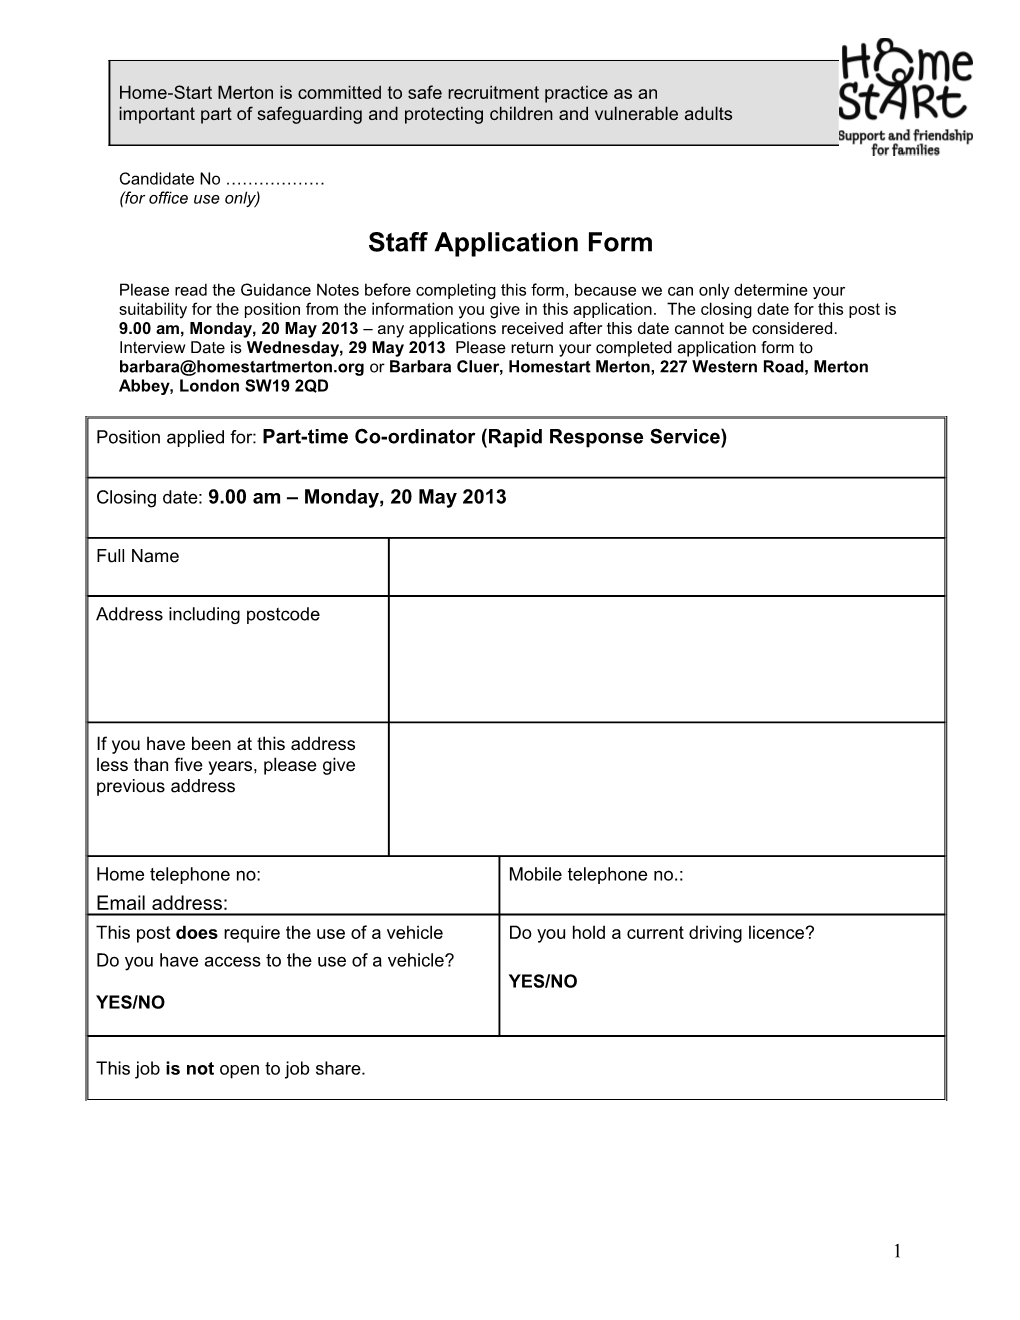 Schemes Should Note That Prior to Sending This Application Form Please Ensure That You